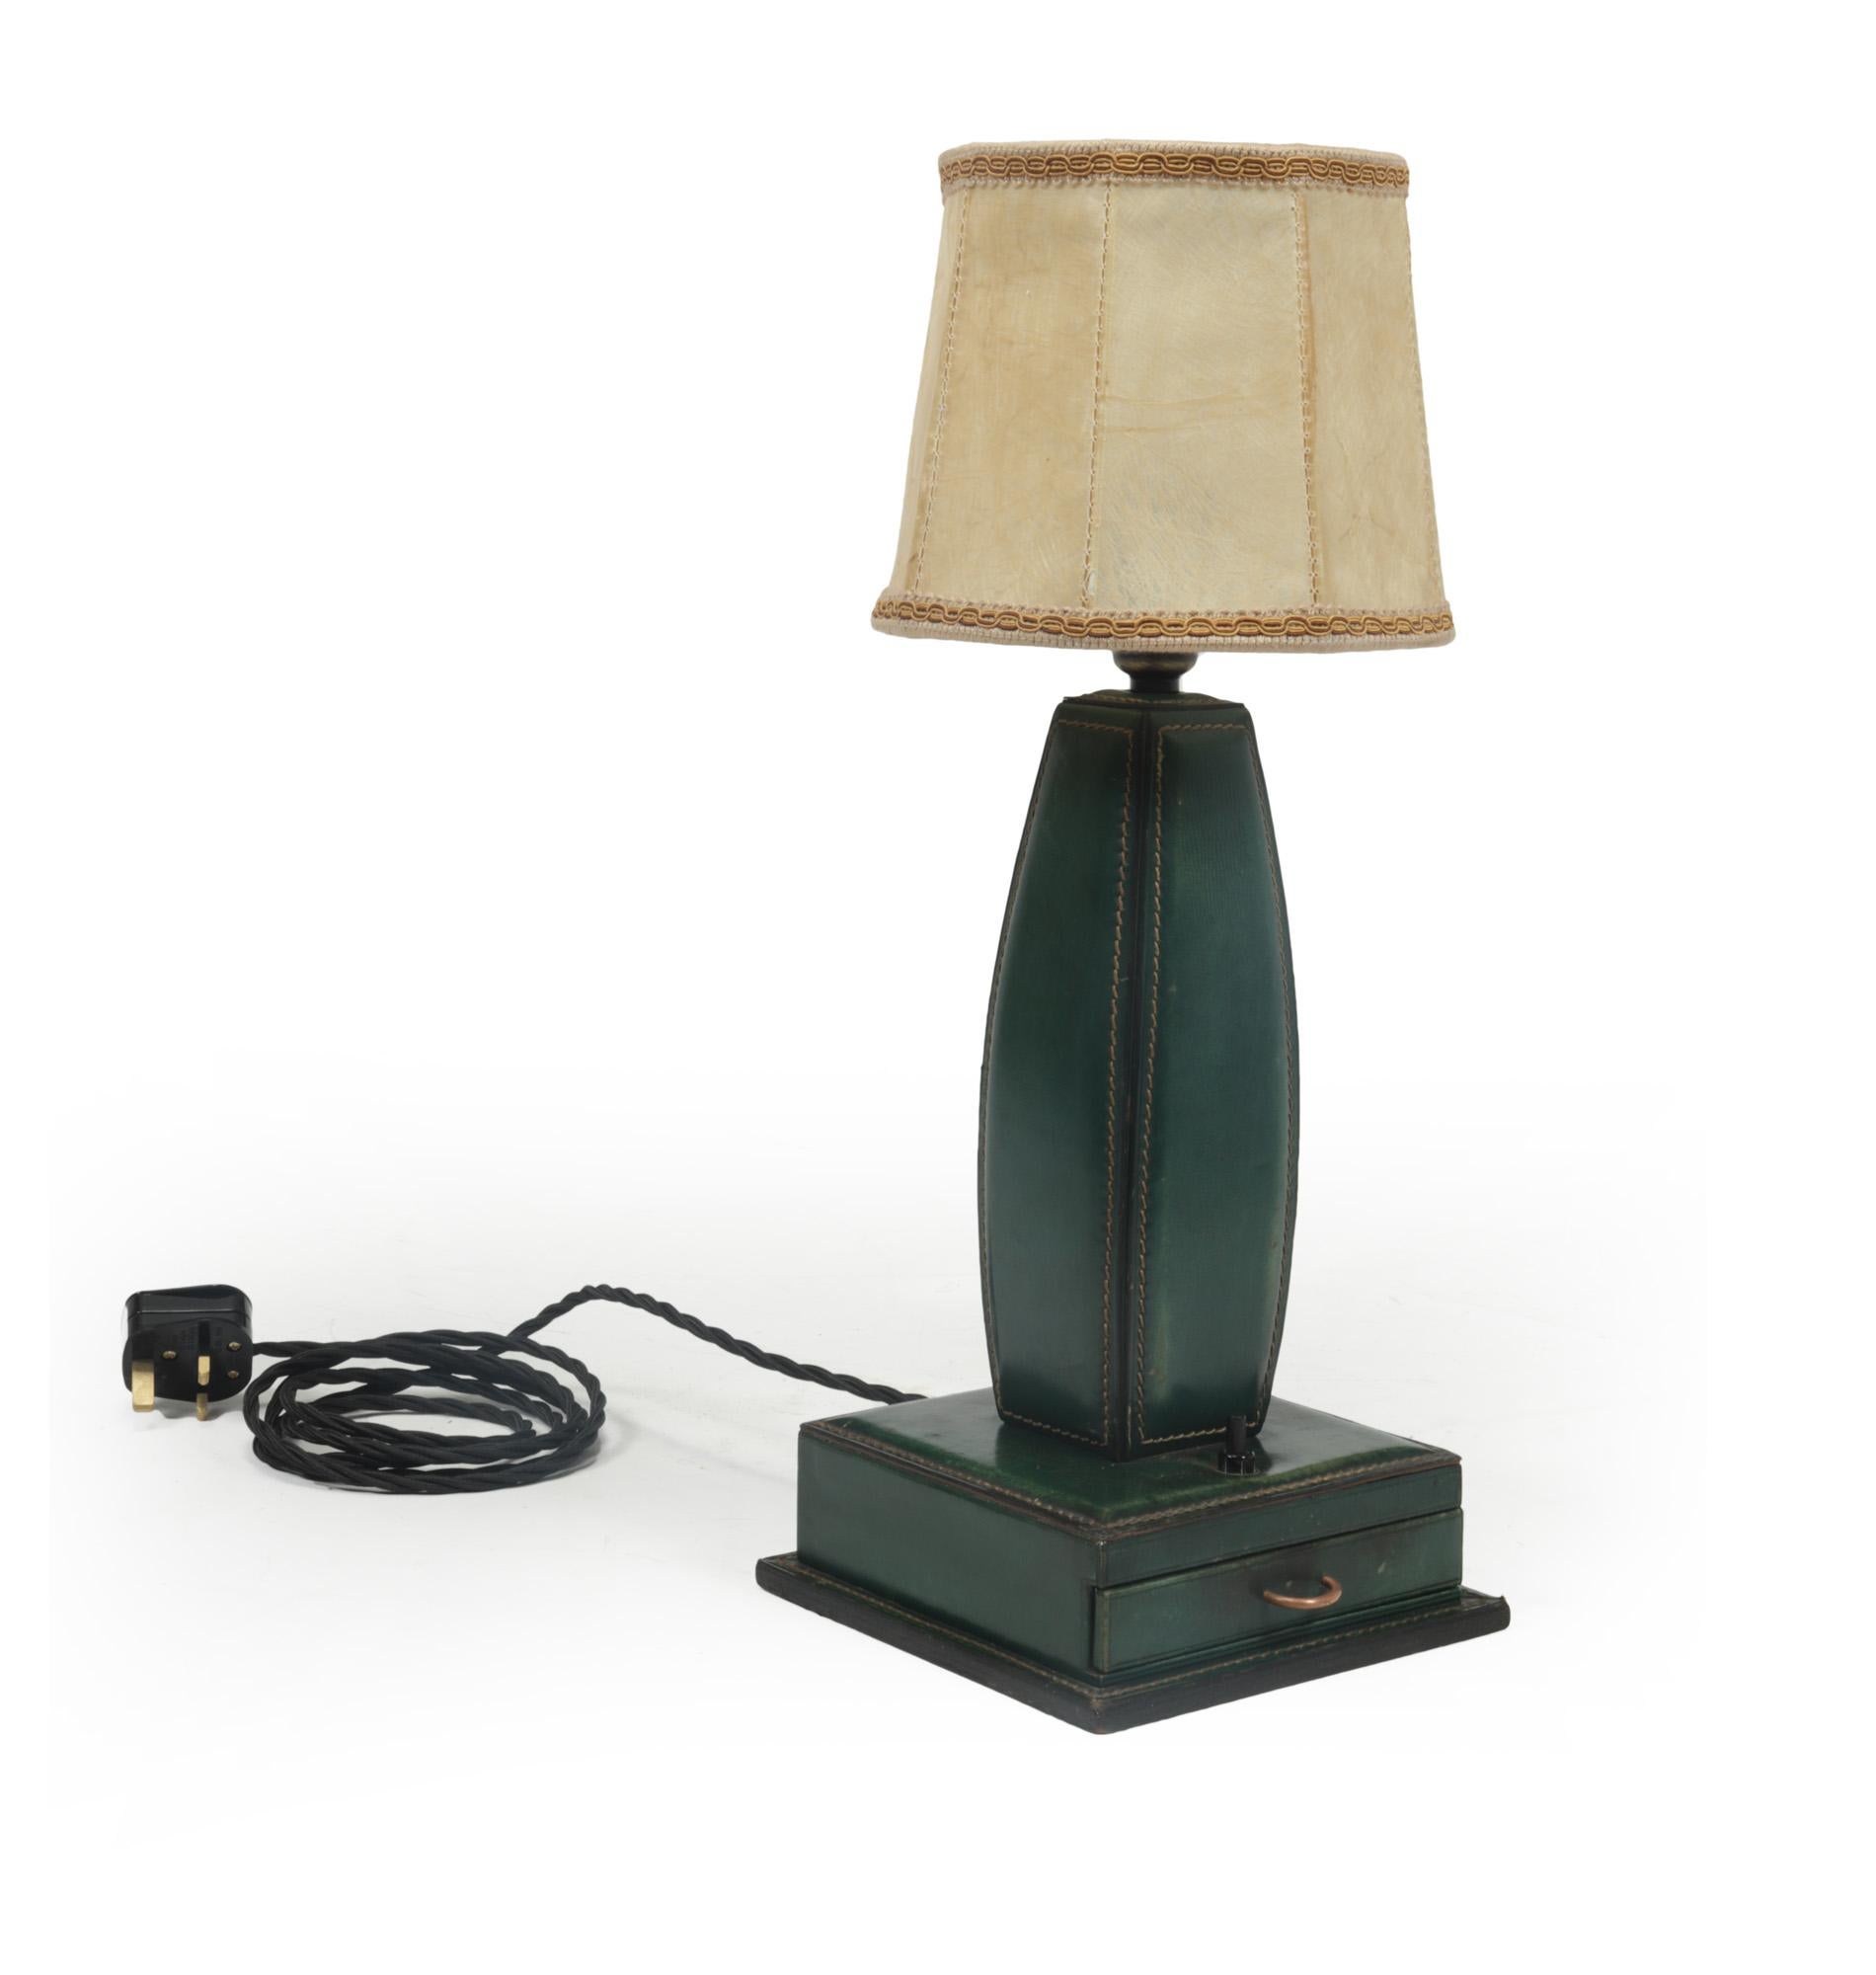 Stitched leather table lamp by Jacques Adnet France 1950
A table lamp by Jacques Adnet, produced in France in the 1950’s from beautifully patinated green stitched leather and fixed to wooden structure, having a drawer in the base with a brass